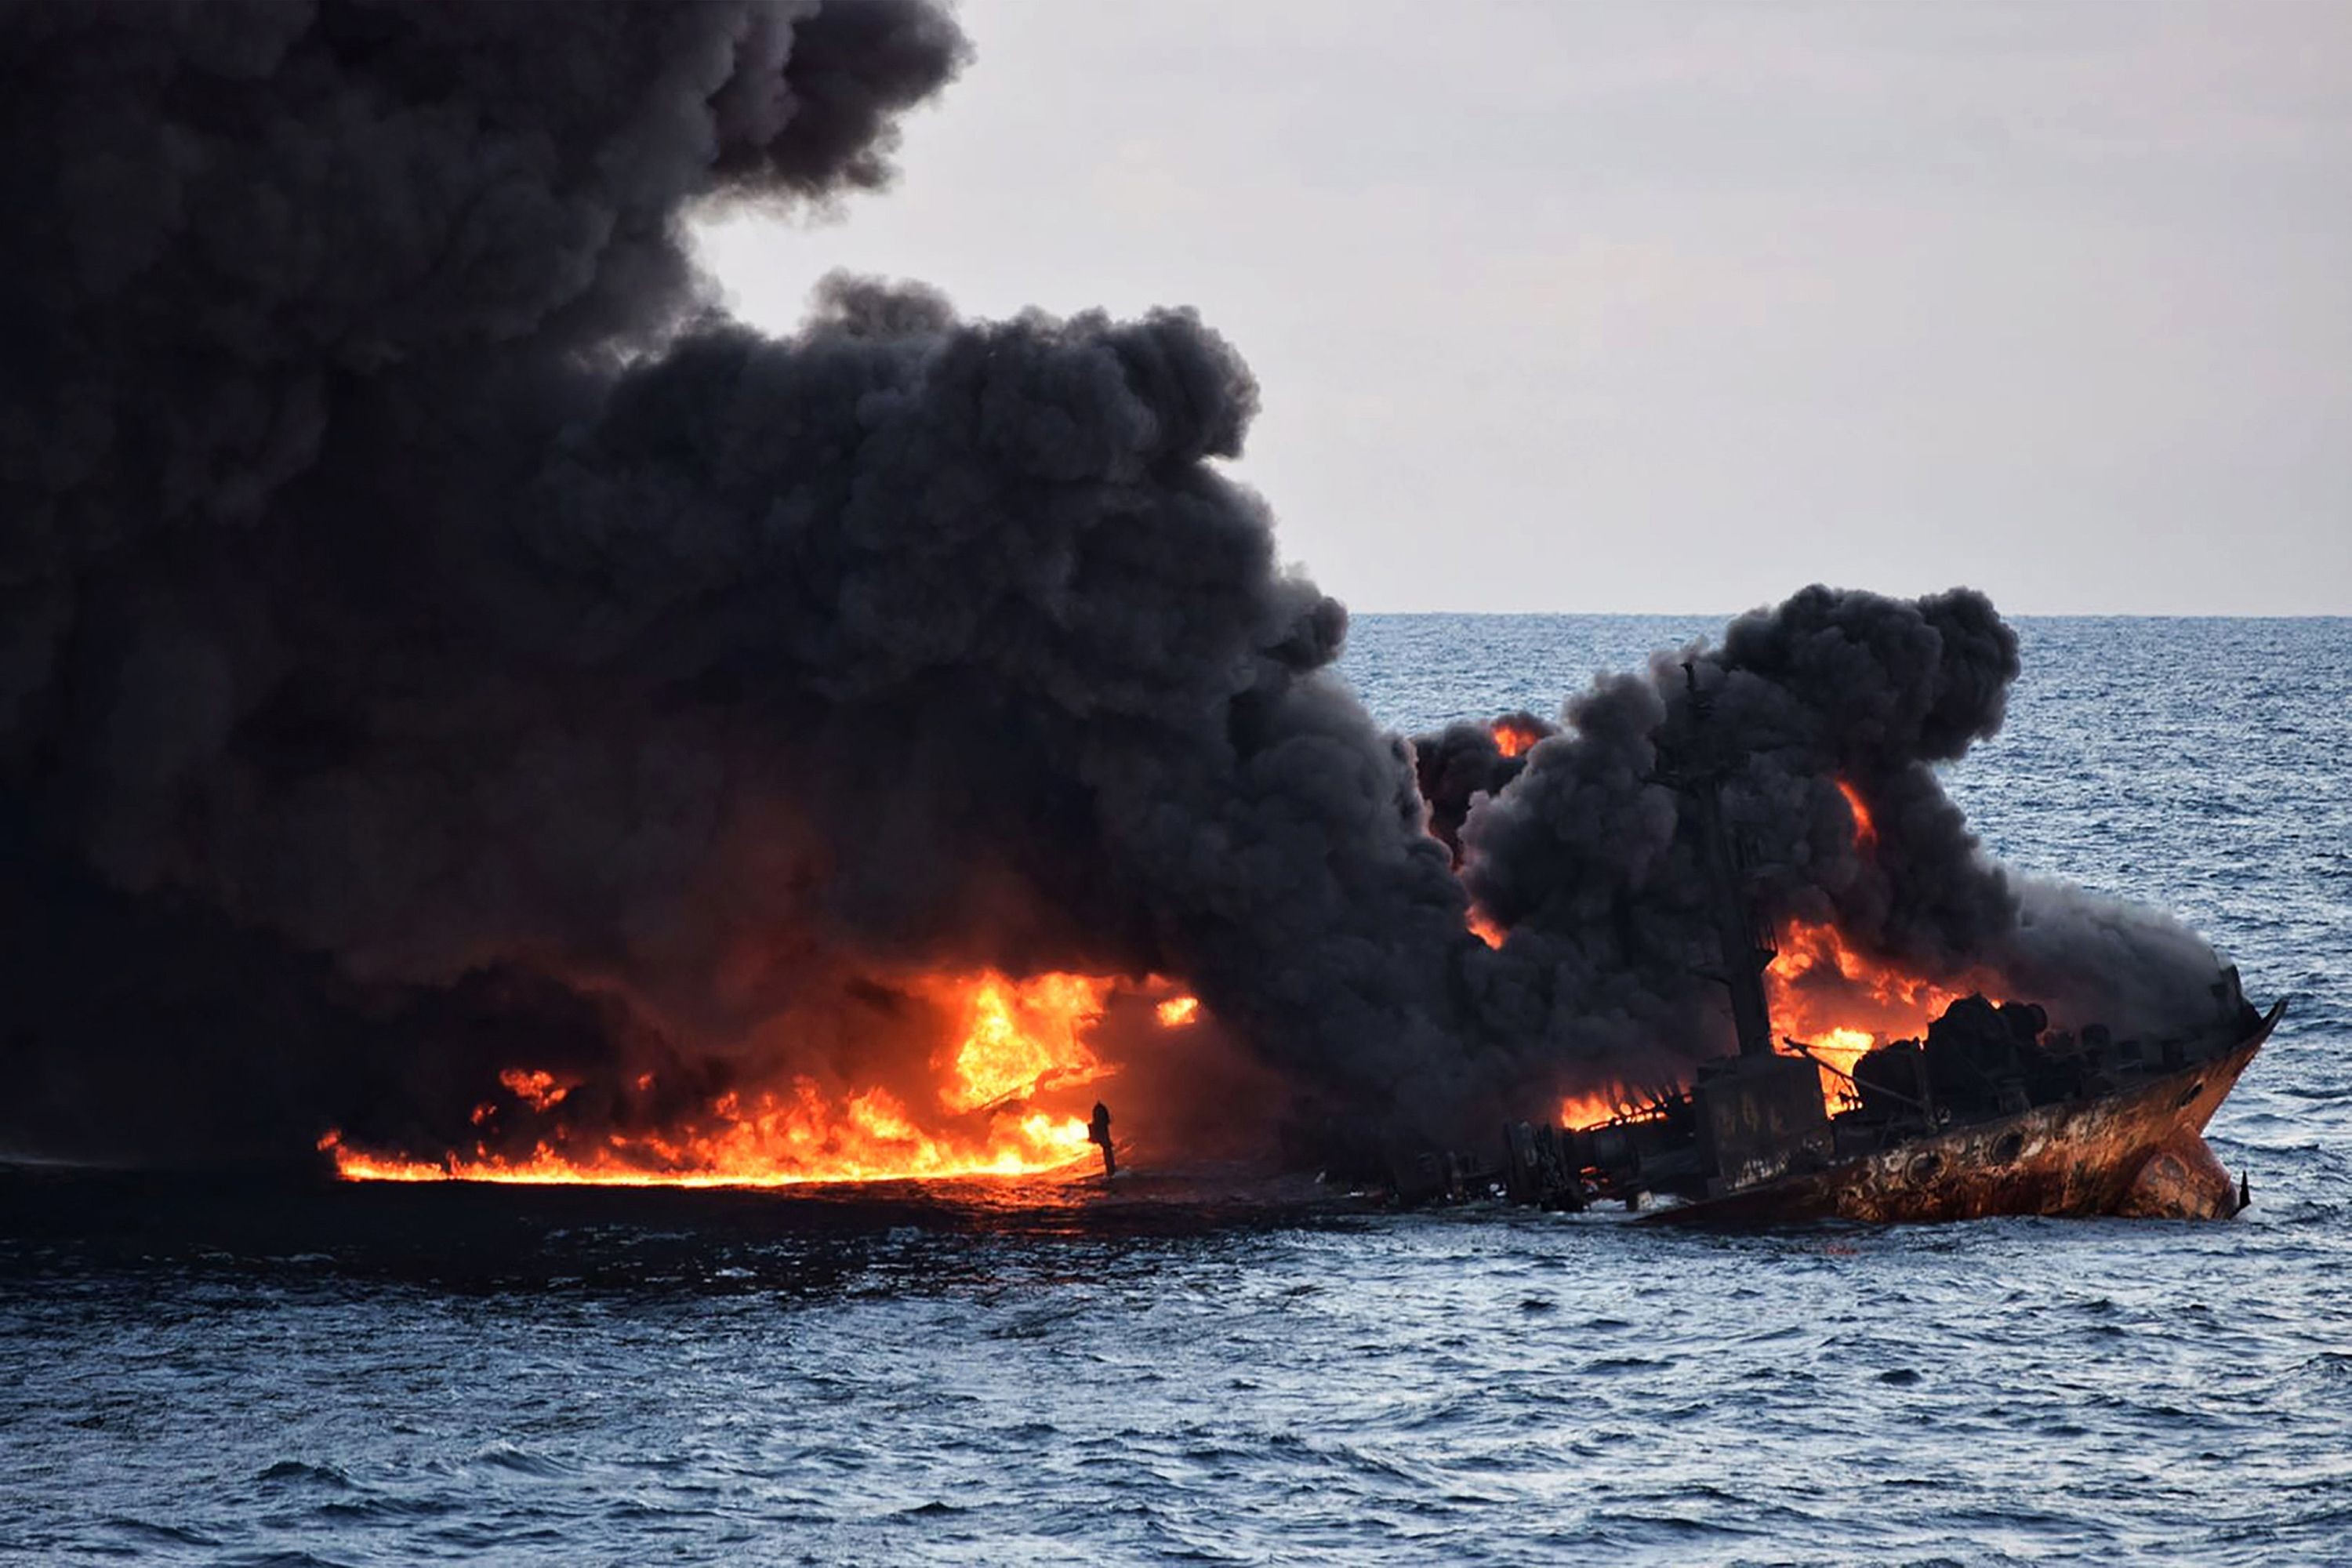 Smoke and flames rose from the burning oil tanker Sanchi after it collided with the CF Crystal, a Hong Kong-registered bulk freighter, on January 6. Photo: AFP 